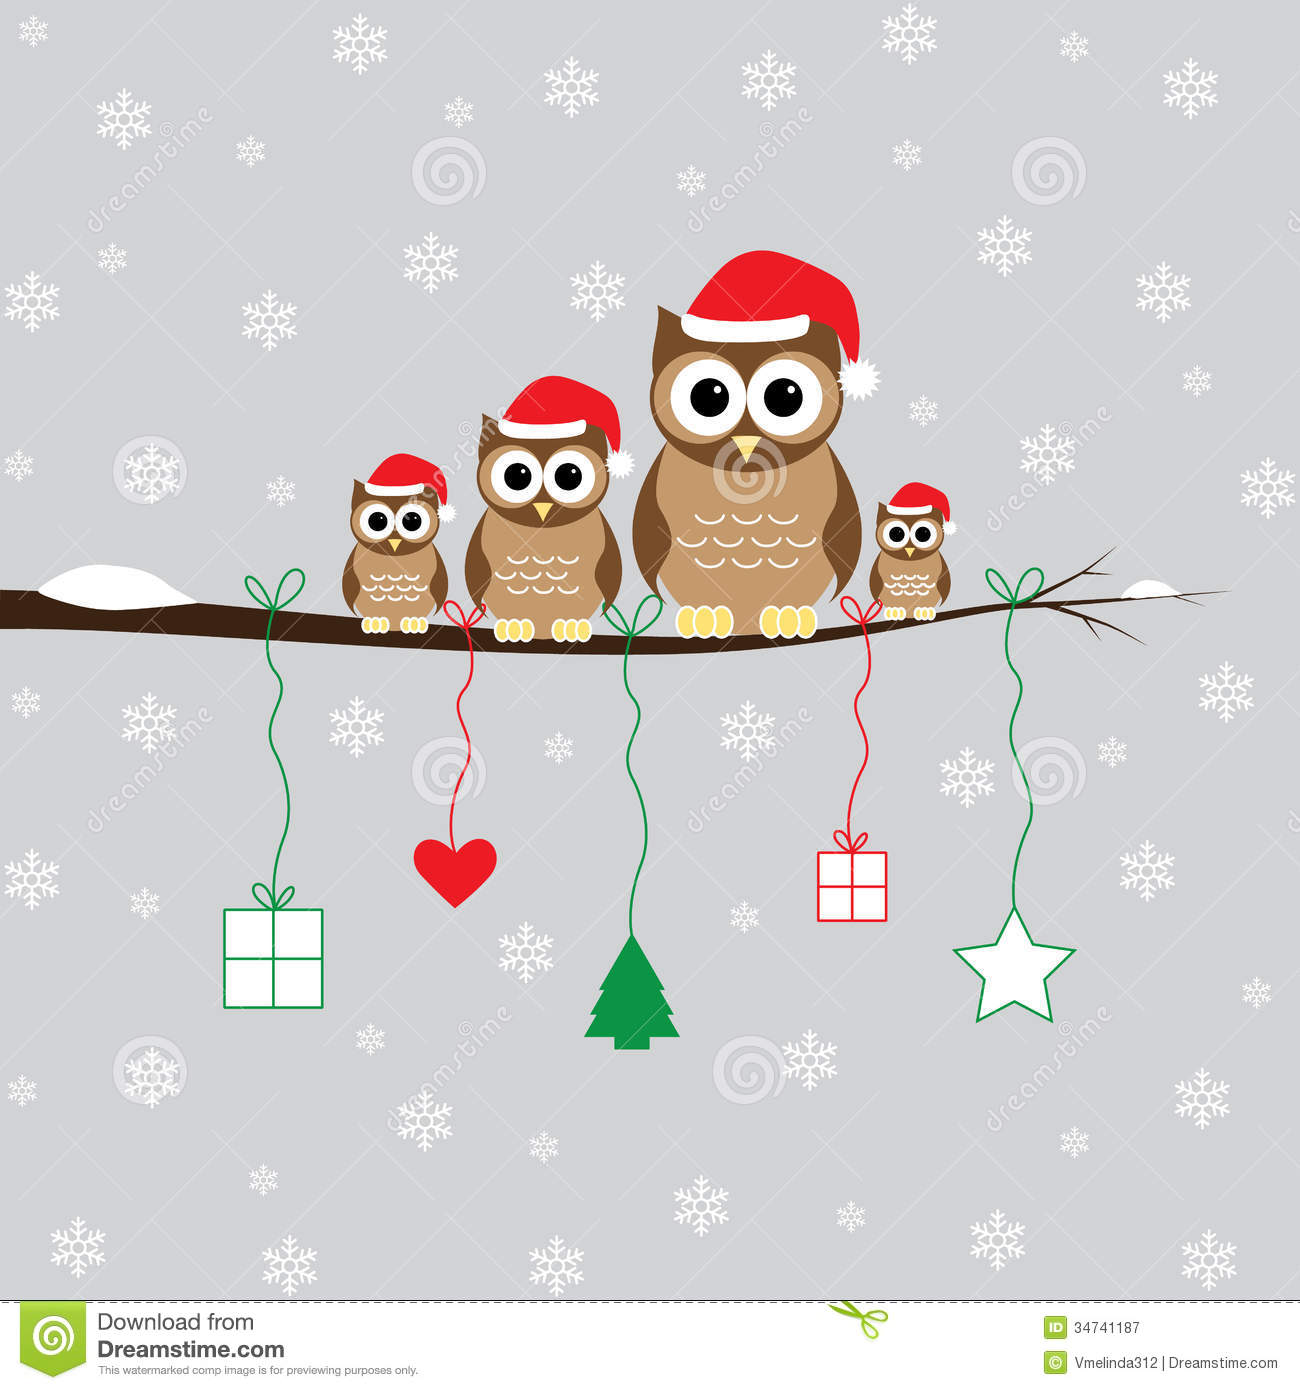 Photos And Image Christmas Dreamstime Smart Cataloguer